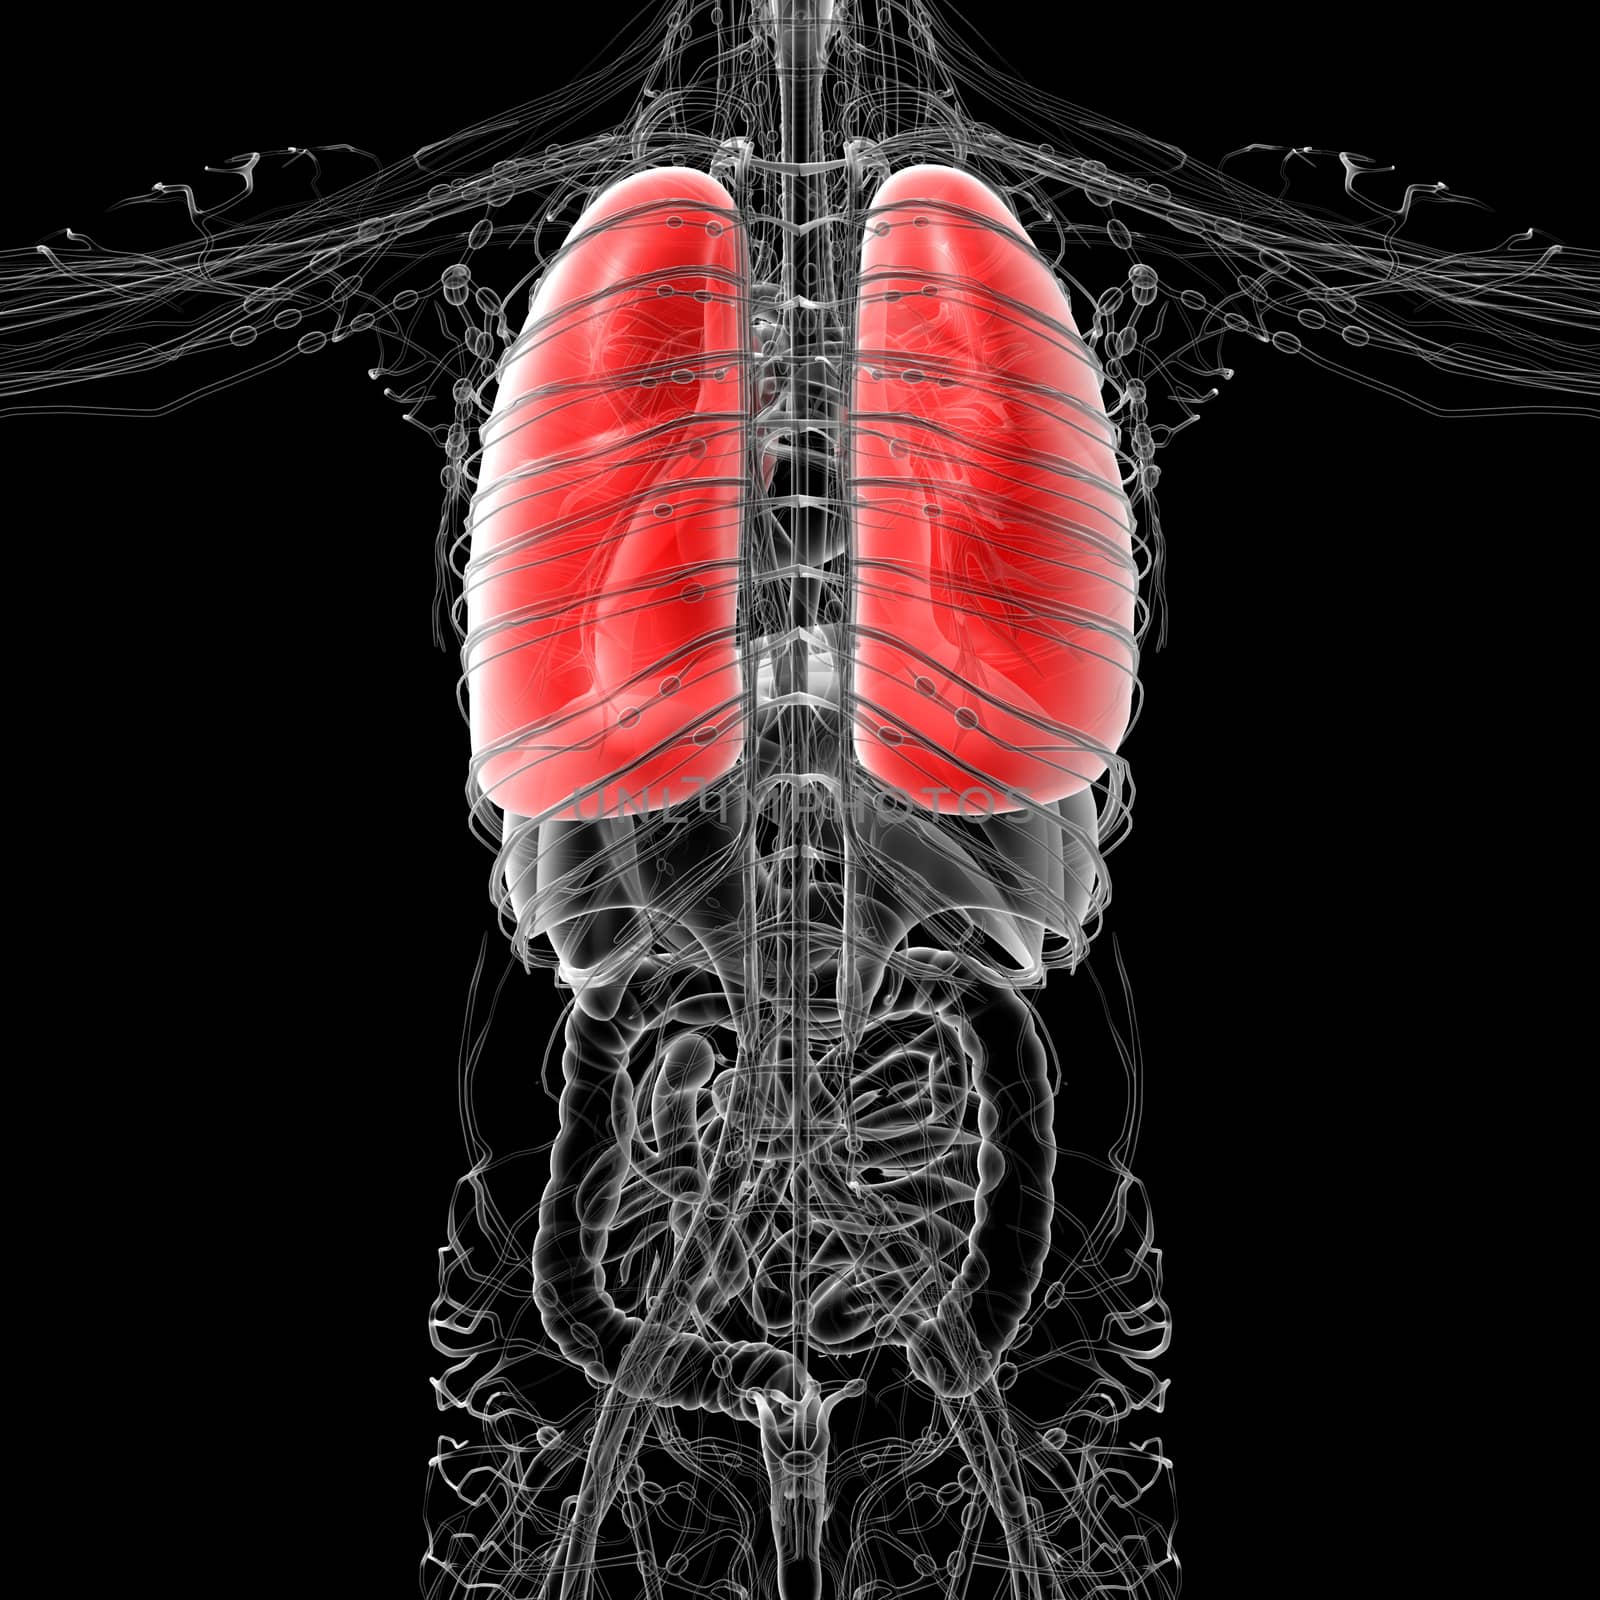 3D medical illustration of the human lung by maya2008